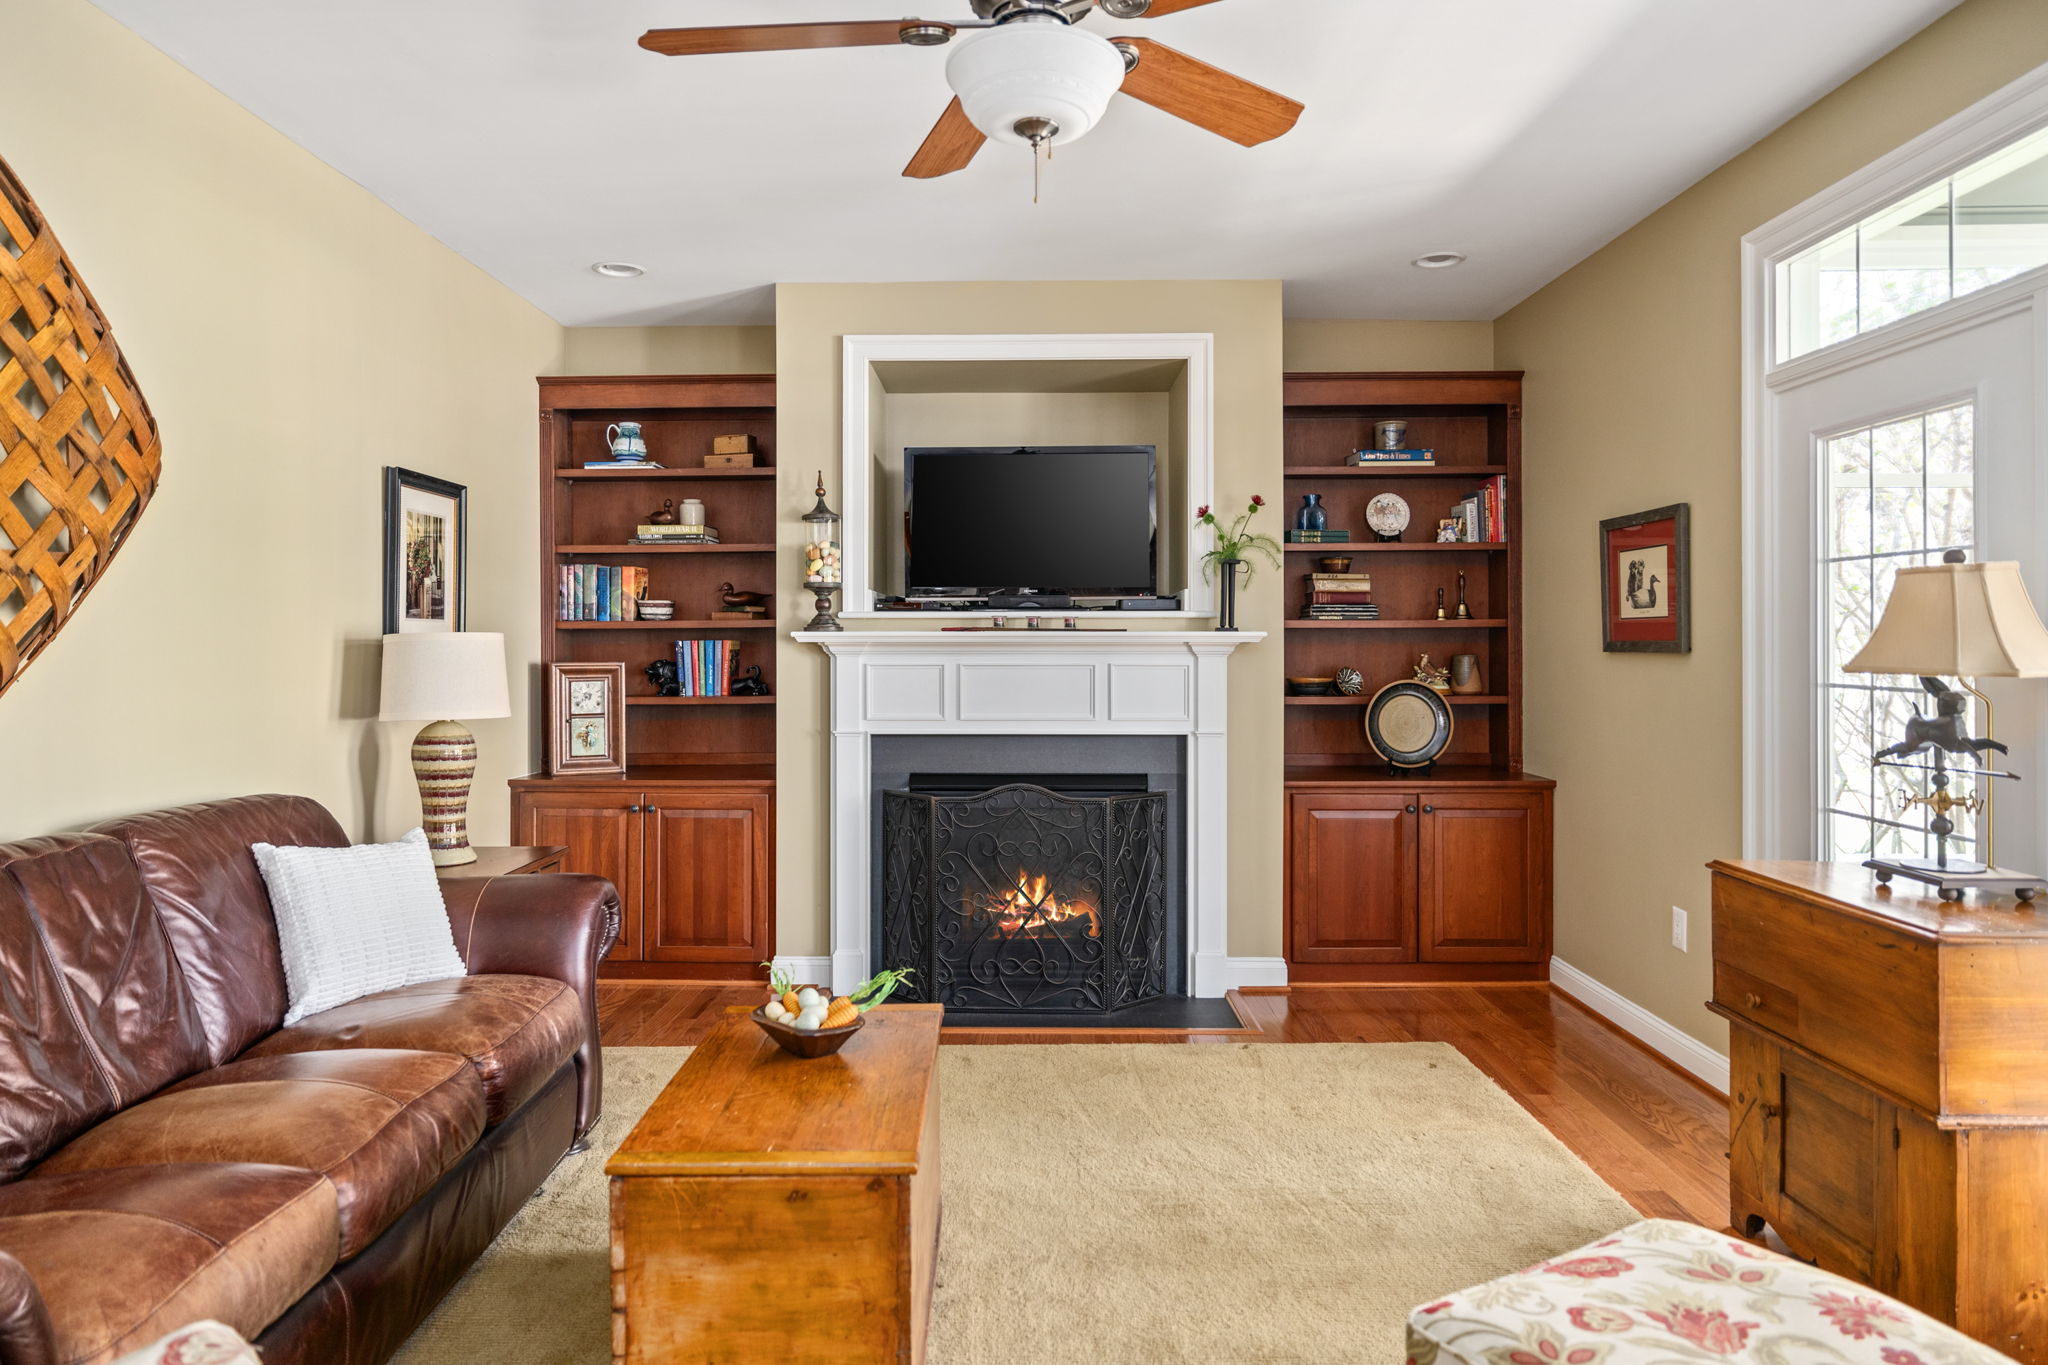 Gas fireplace & built-in Bookcases